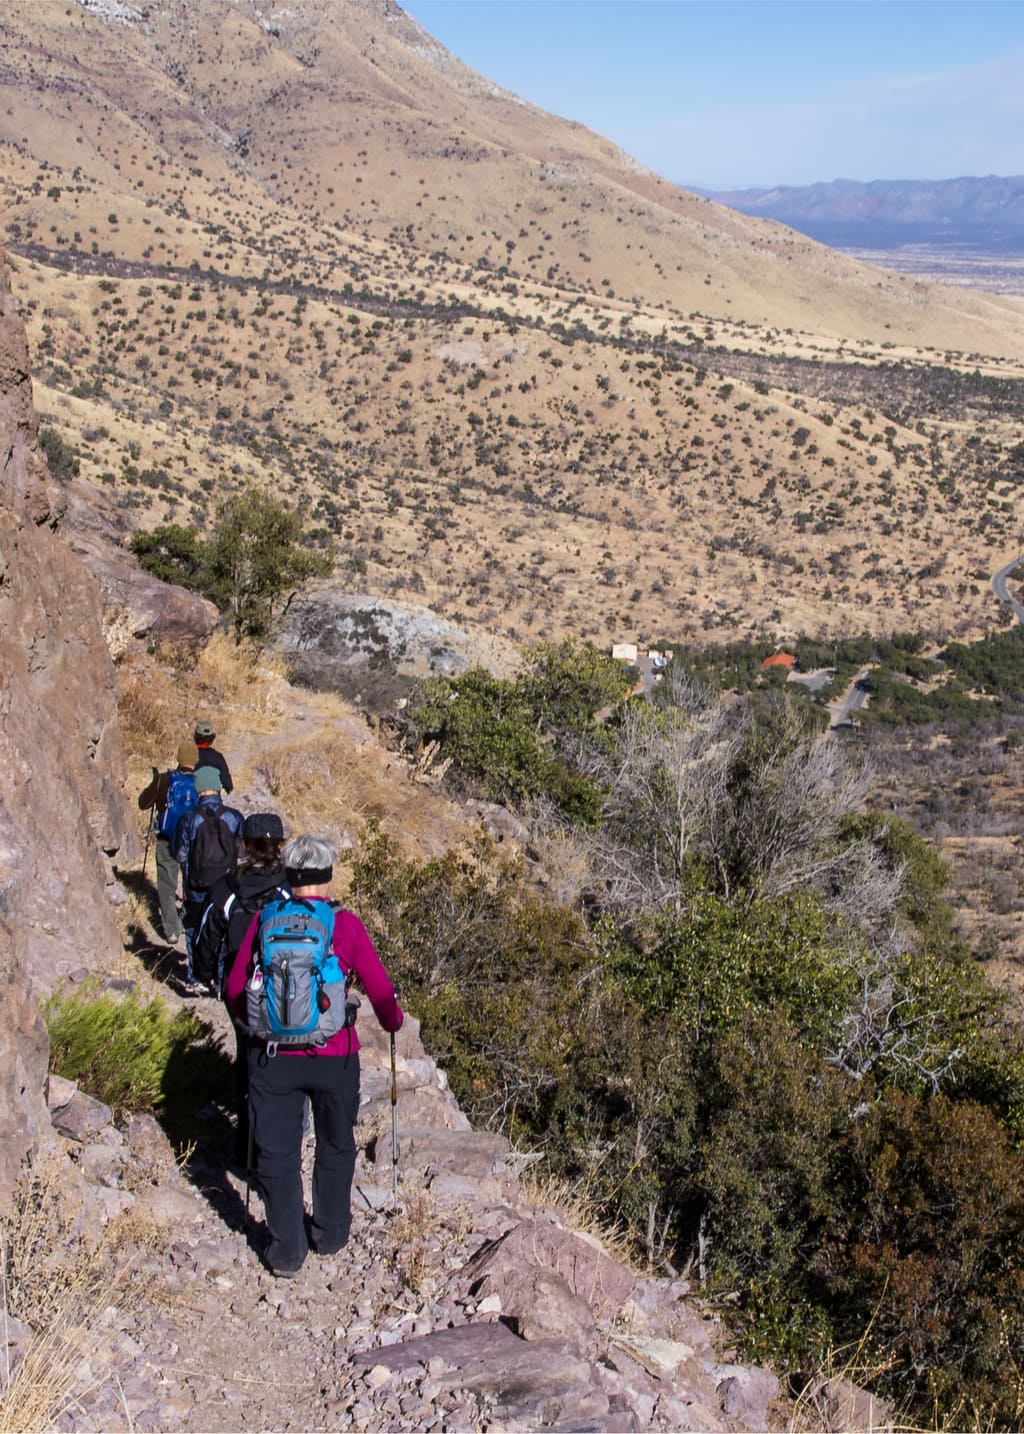 A group of hikers going down on rocky hiking track outside of Sierra Vista, Arizona